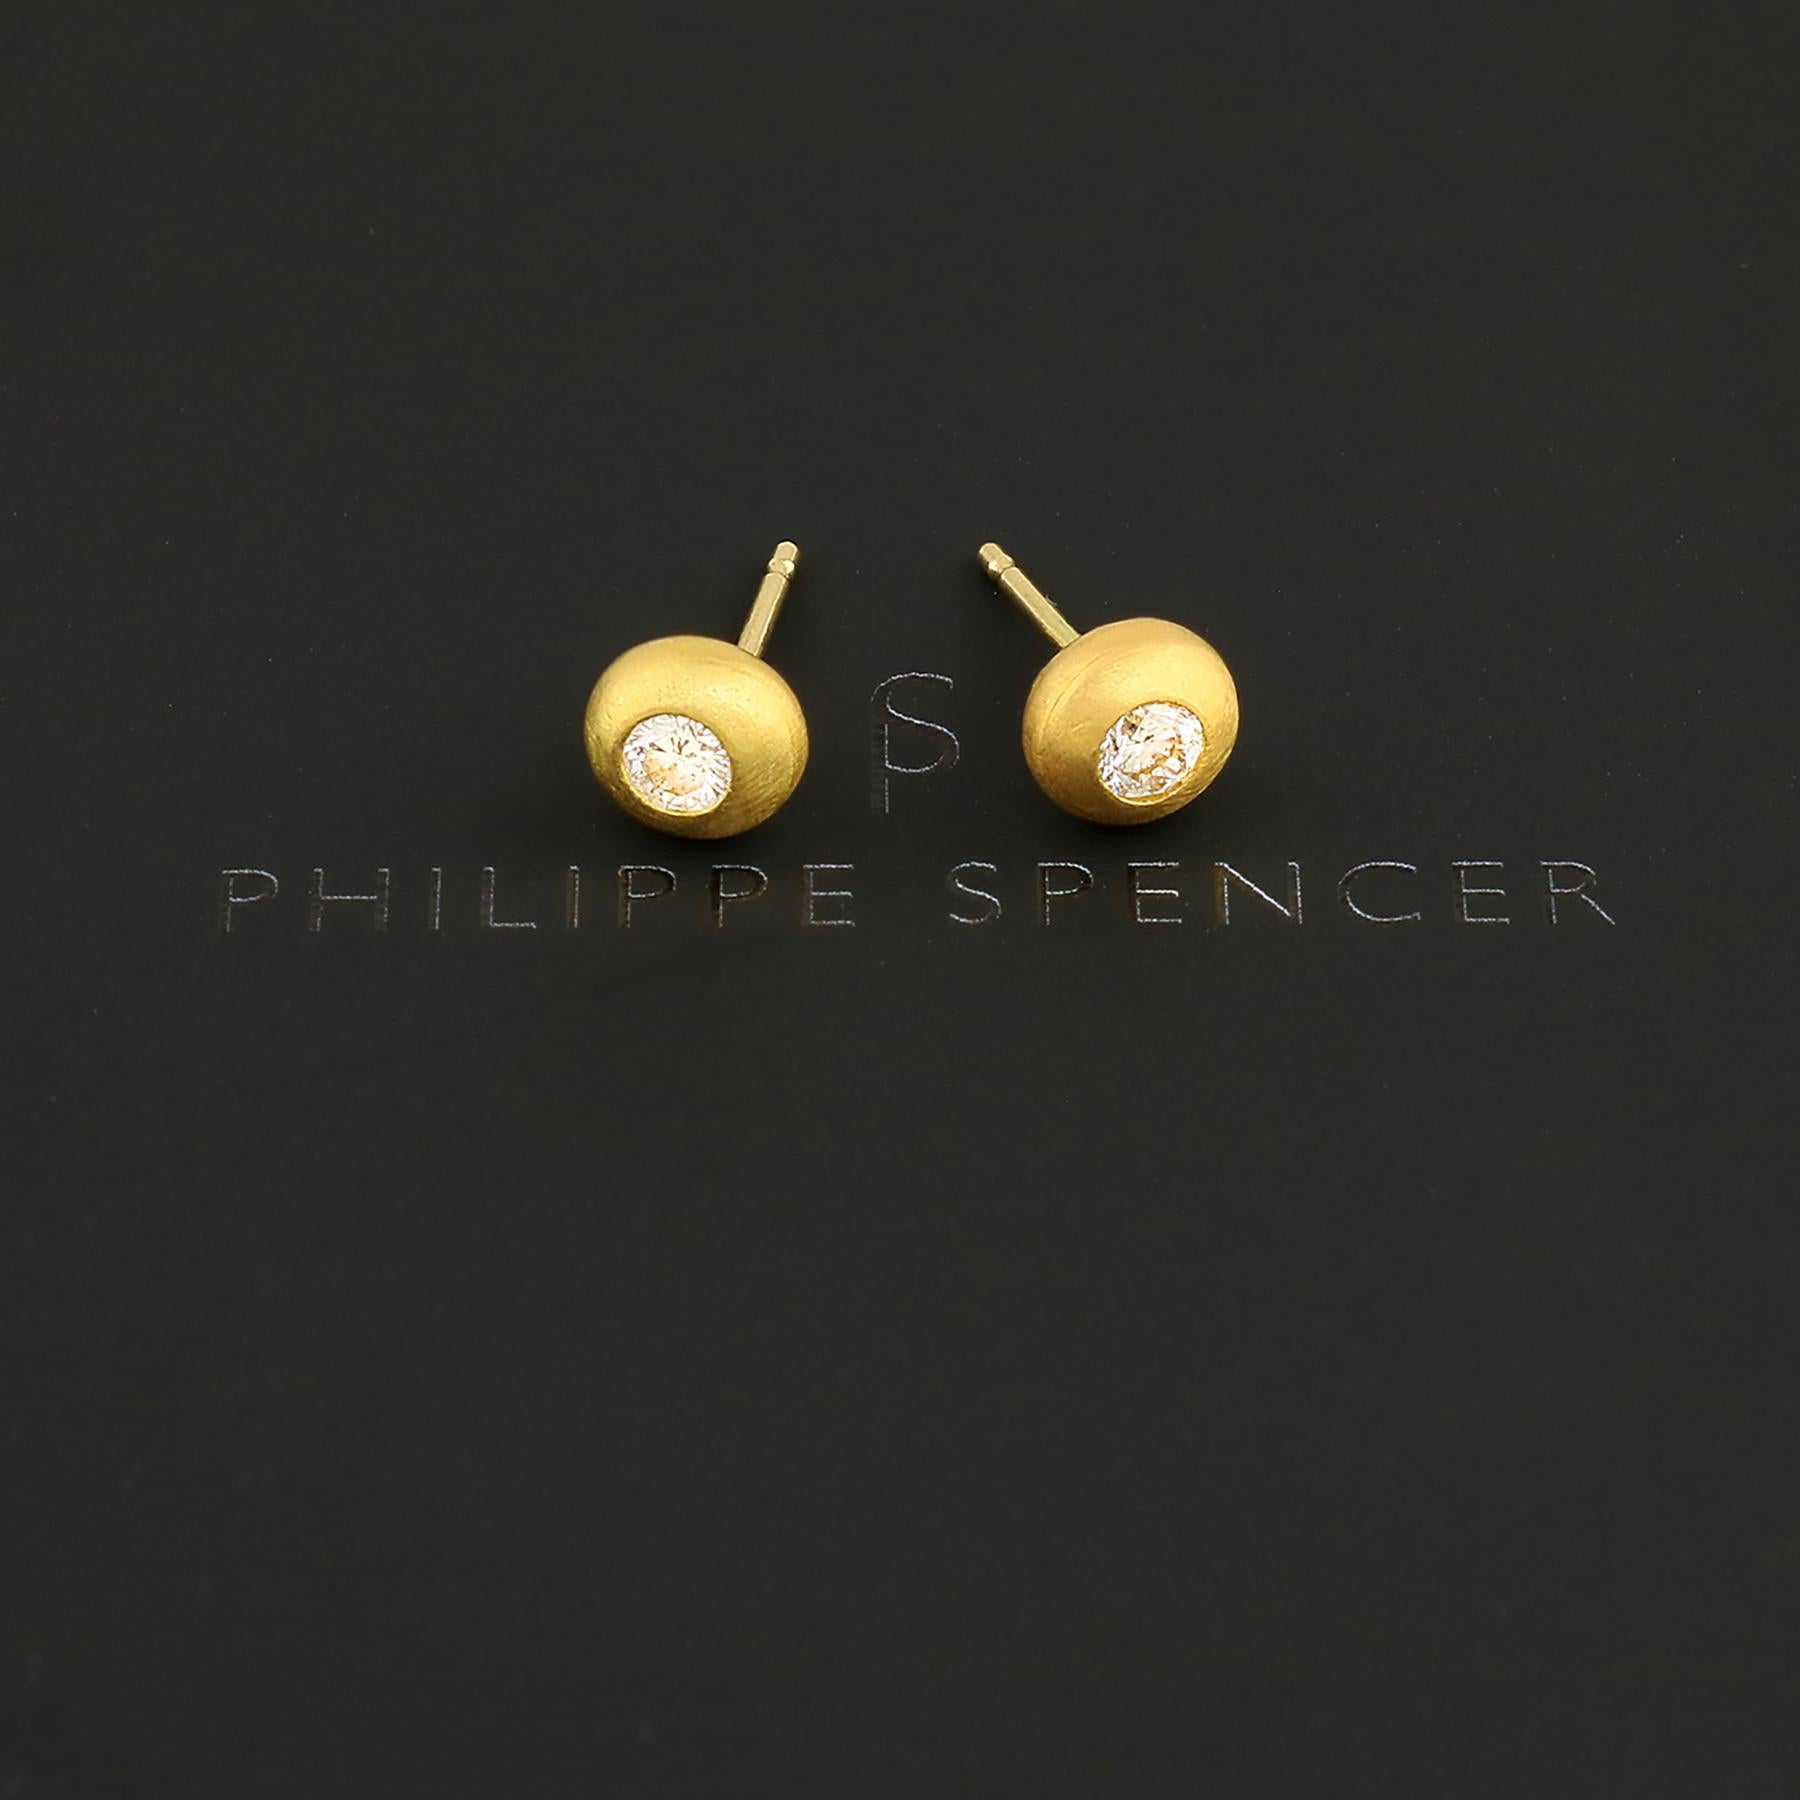 PHILIPPE SPENCER - 1/3 Ct. Total COLORLESS (D-F) Diamonds set in Solid 20K Gold Drop Studs. 18K Gold Post Back and Locking Nut for durability. Each pair is a unique, authentically smithed One-Of-A-Kind work of art. 

These beautiful Hand-Forged 20K